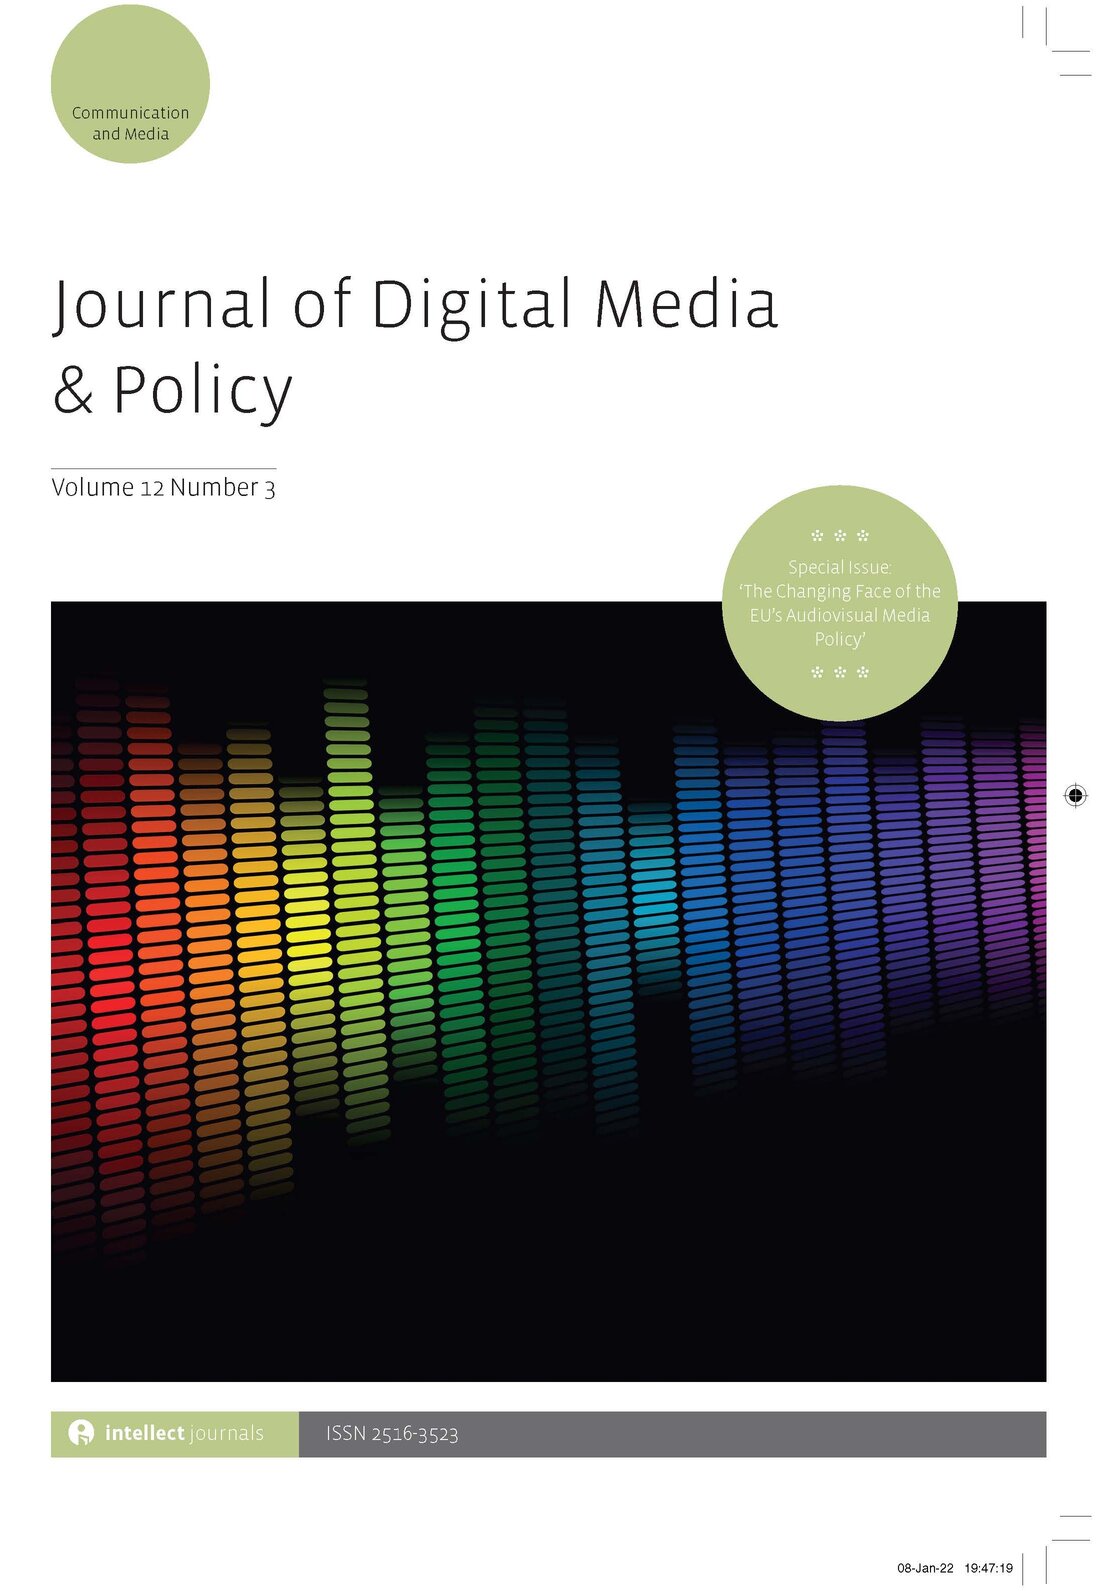 Journal of Digital Media & Policy 12.3 is out now! Special Issue